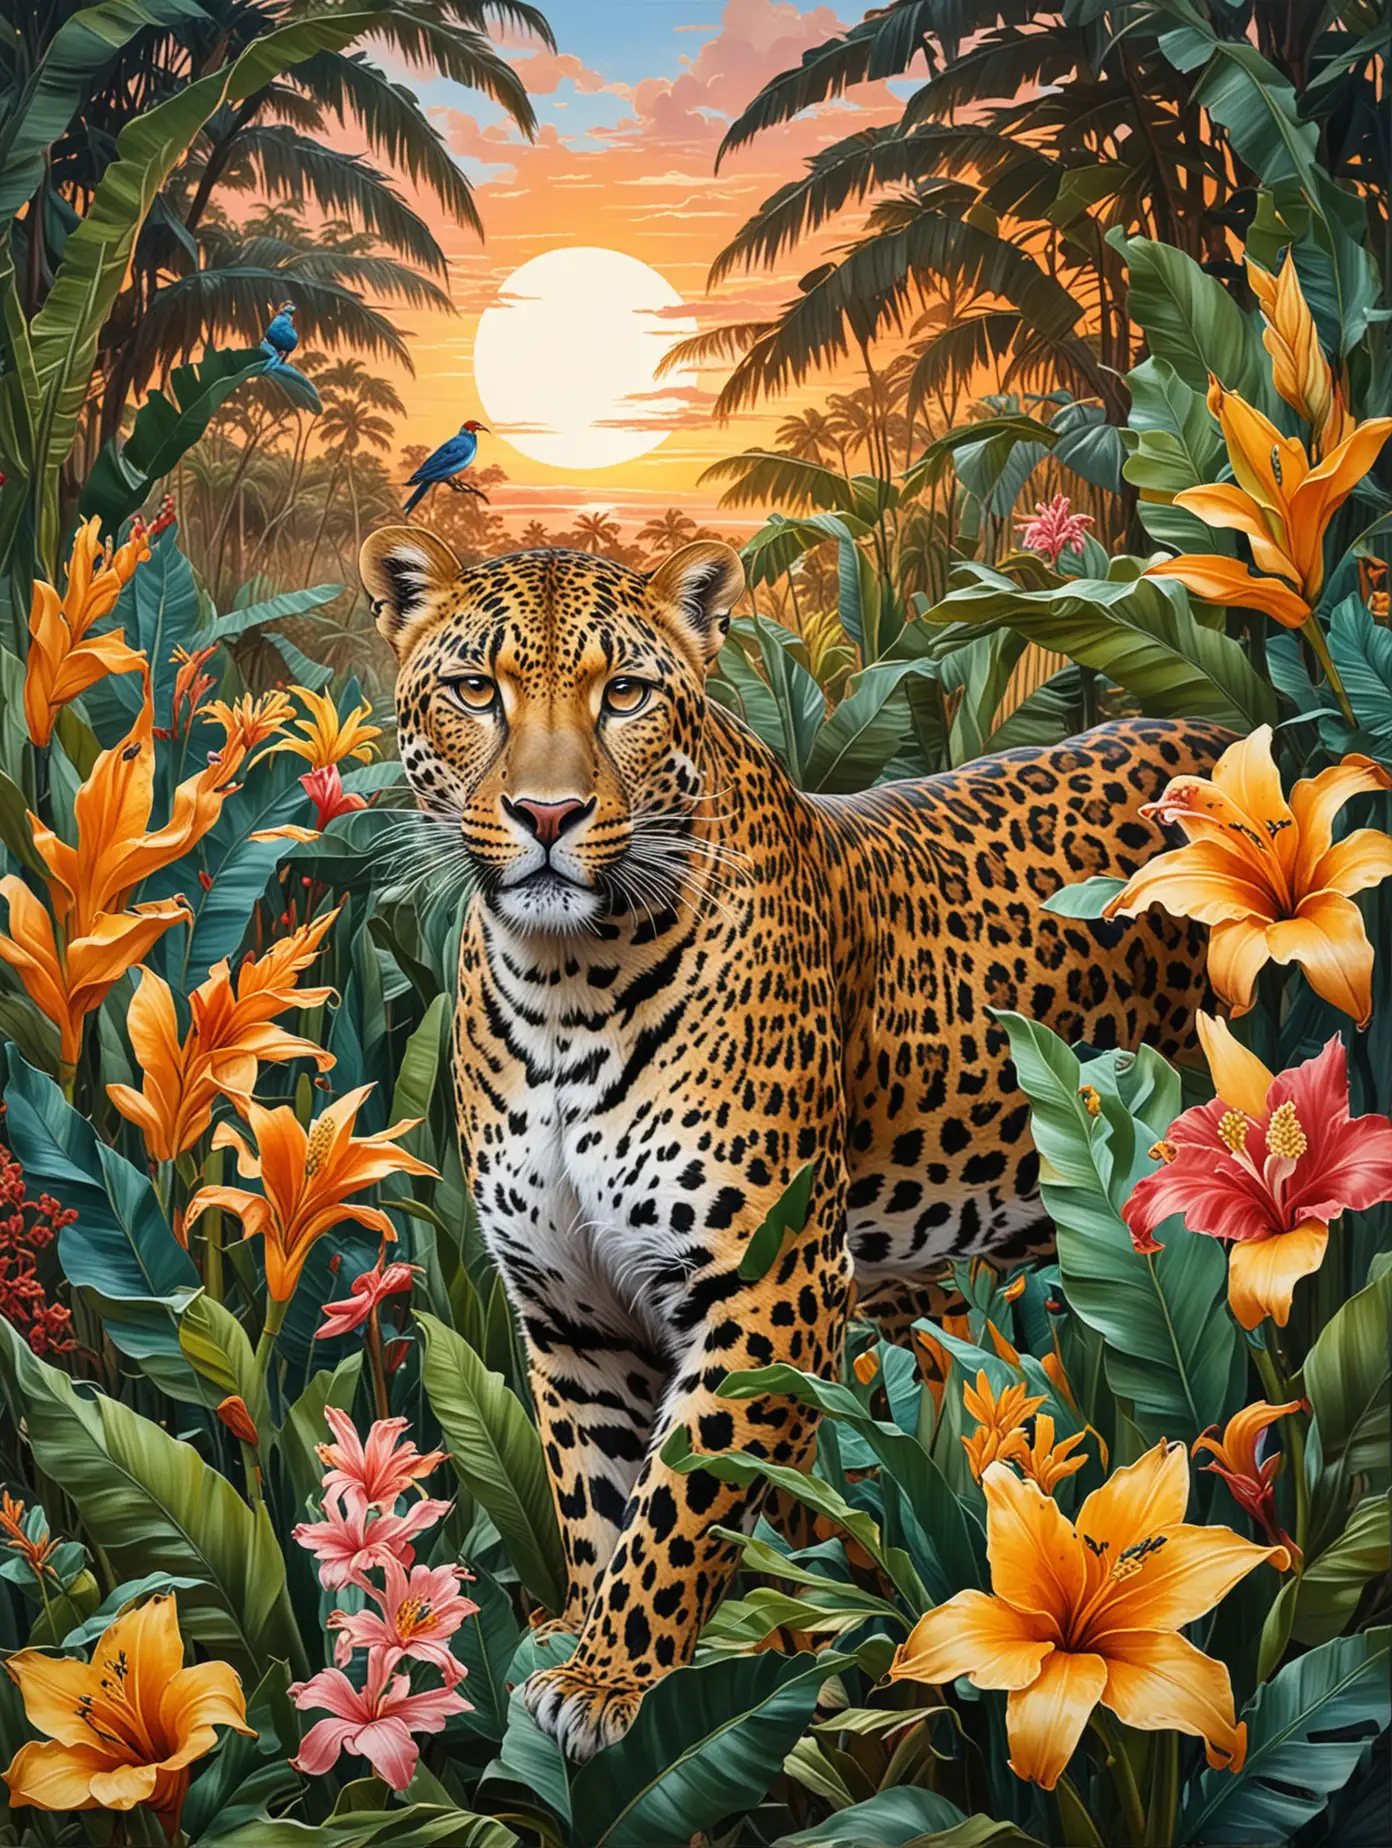 Leopard Amidst Tropical Paradise at Sunset